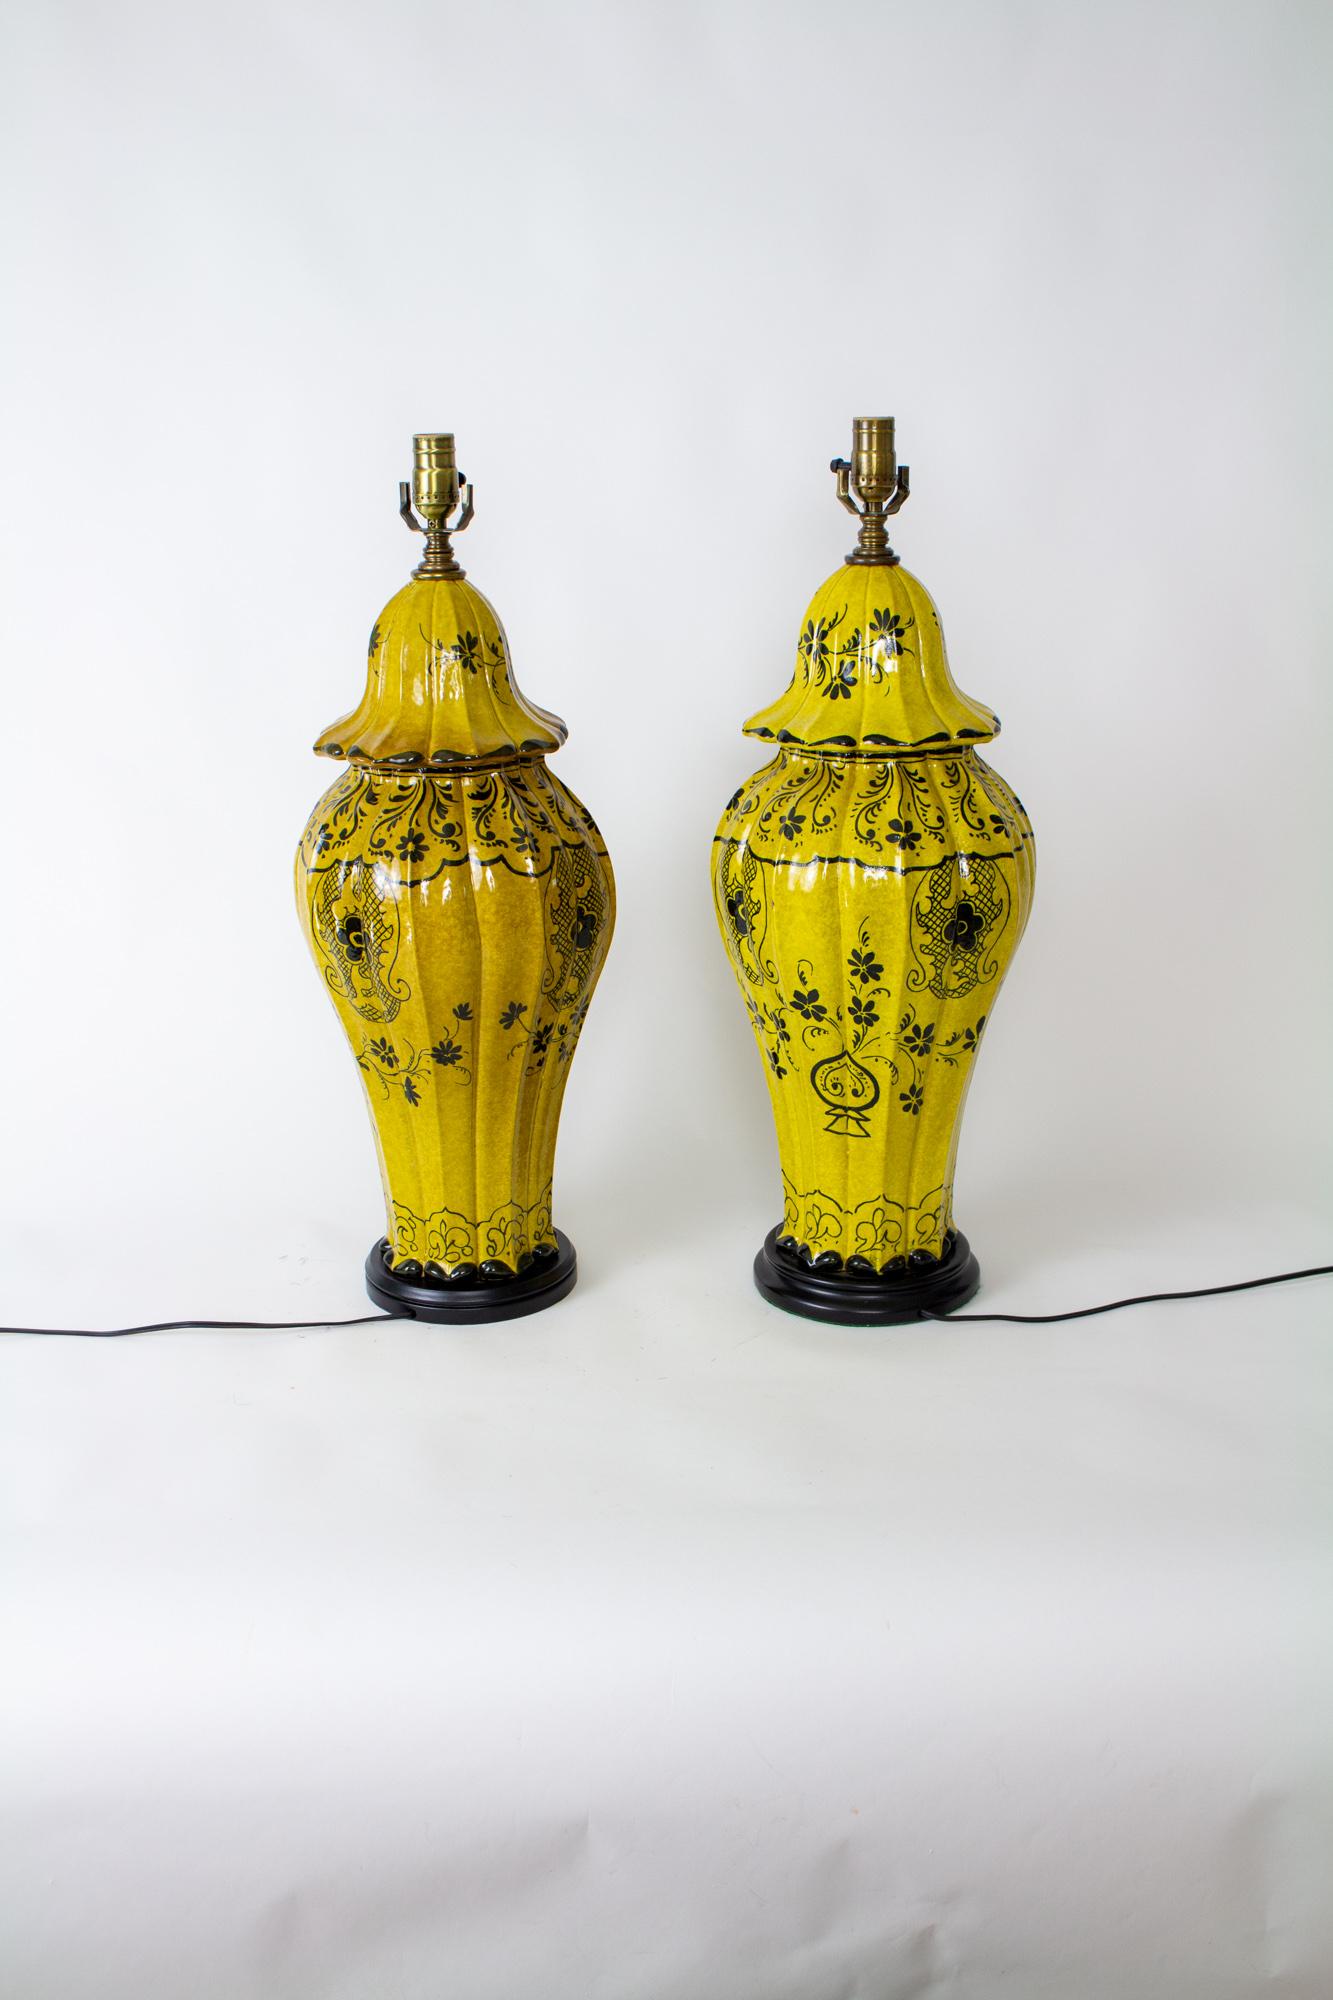 Rustic Mid 20th Century Yellow Ceramic Table Lamps, a Pair For Sale